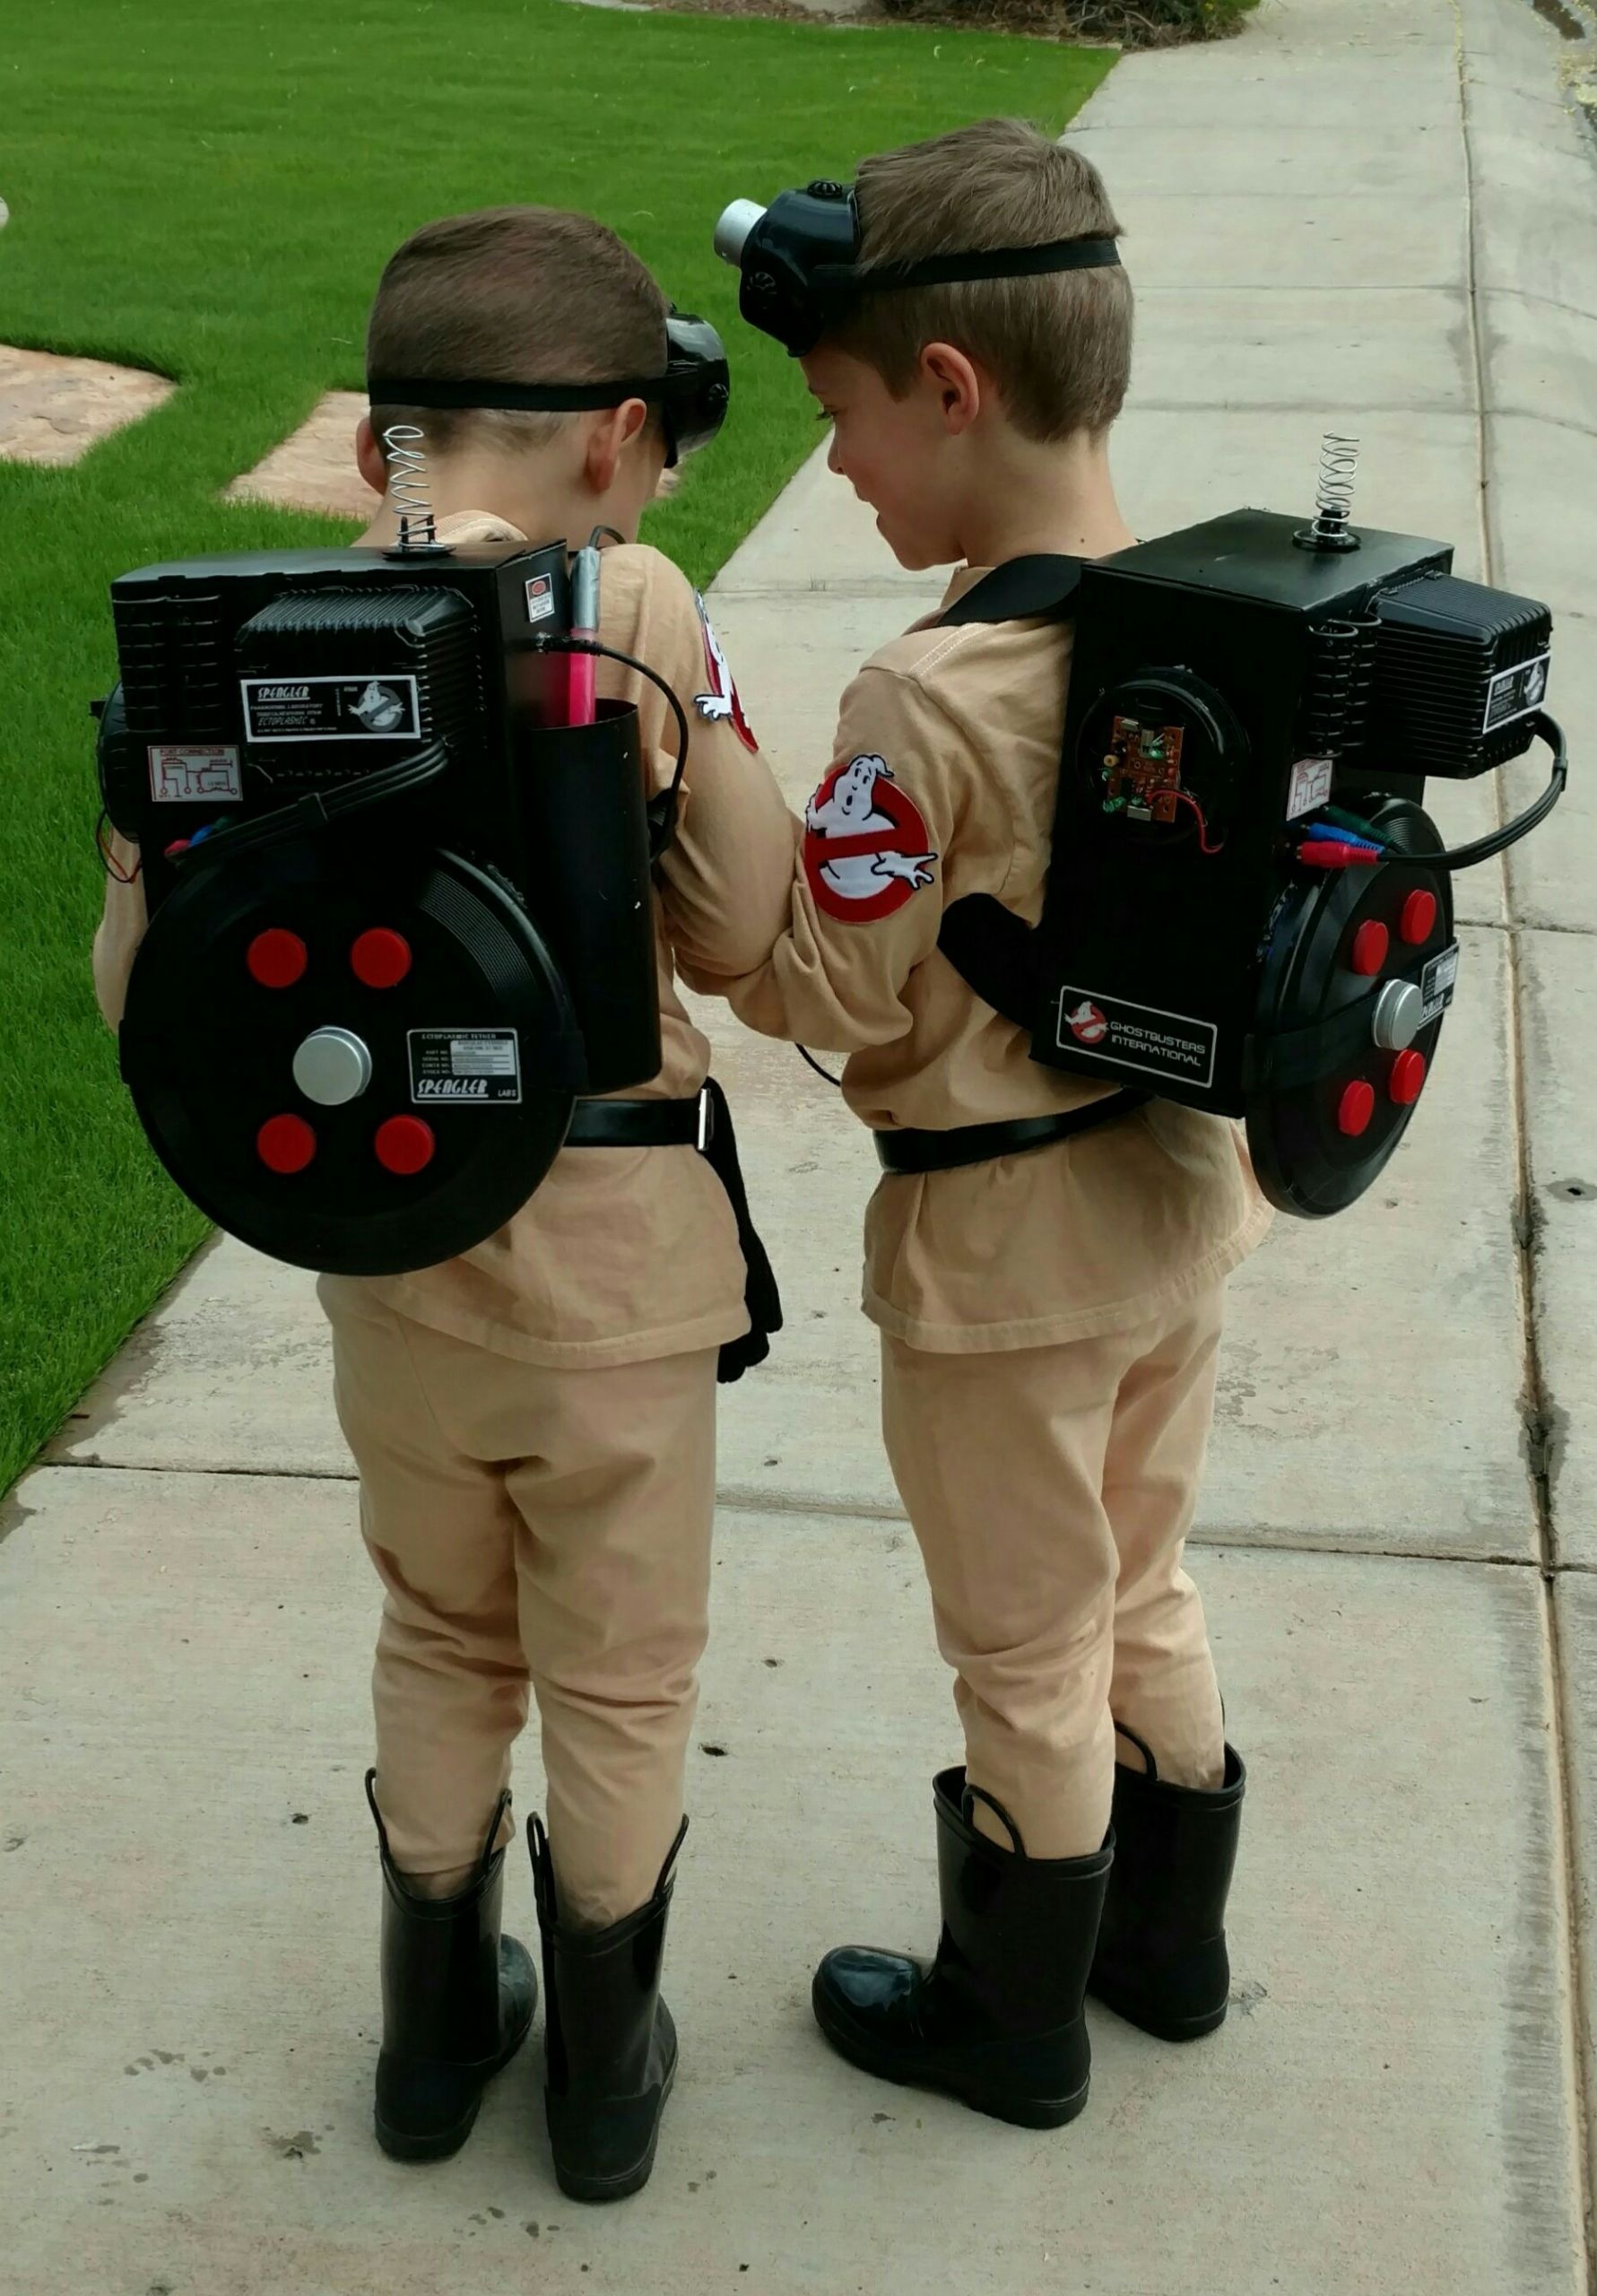 DIY Toddler Ghostbuster Costume
 DIY Ghostbusters Costumes for Twins Costume Yeti